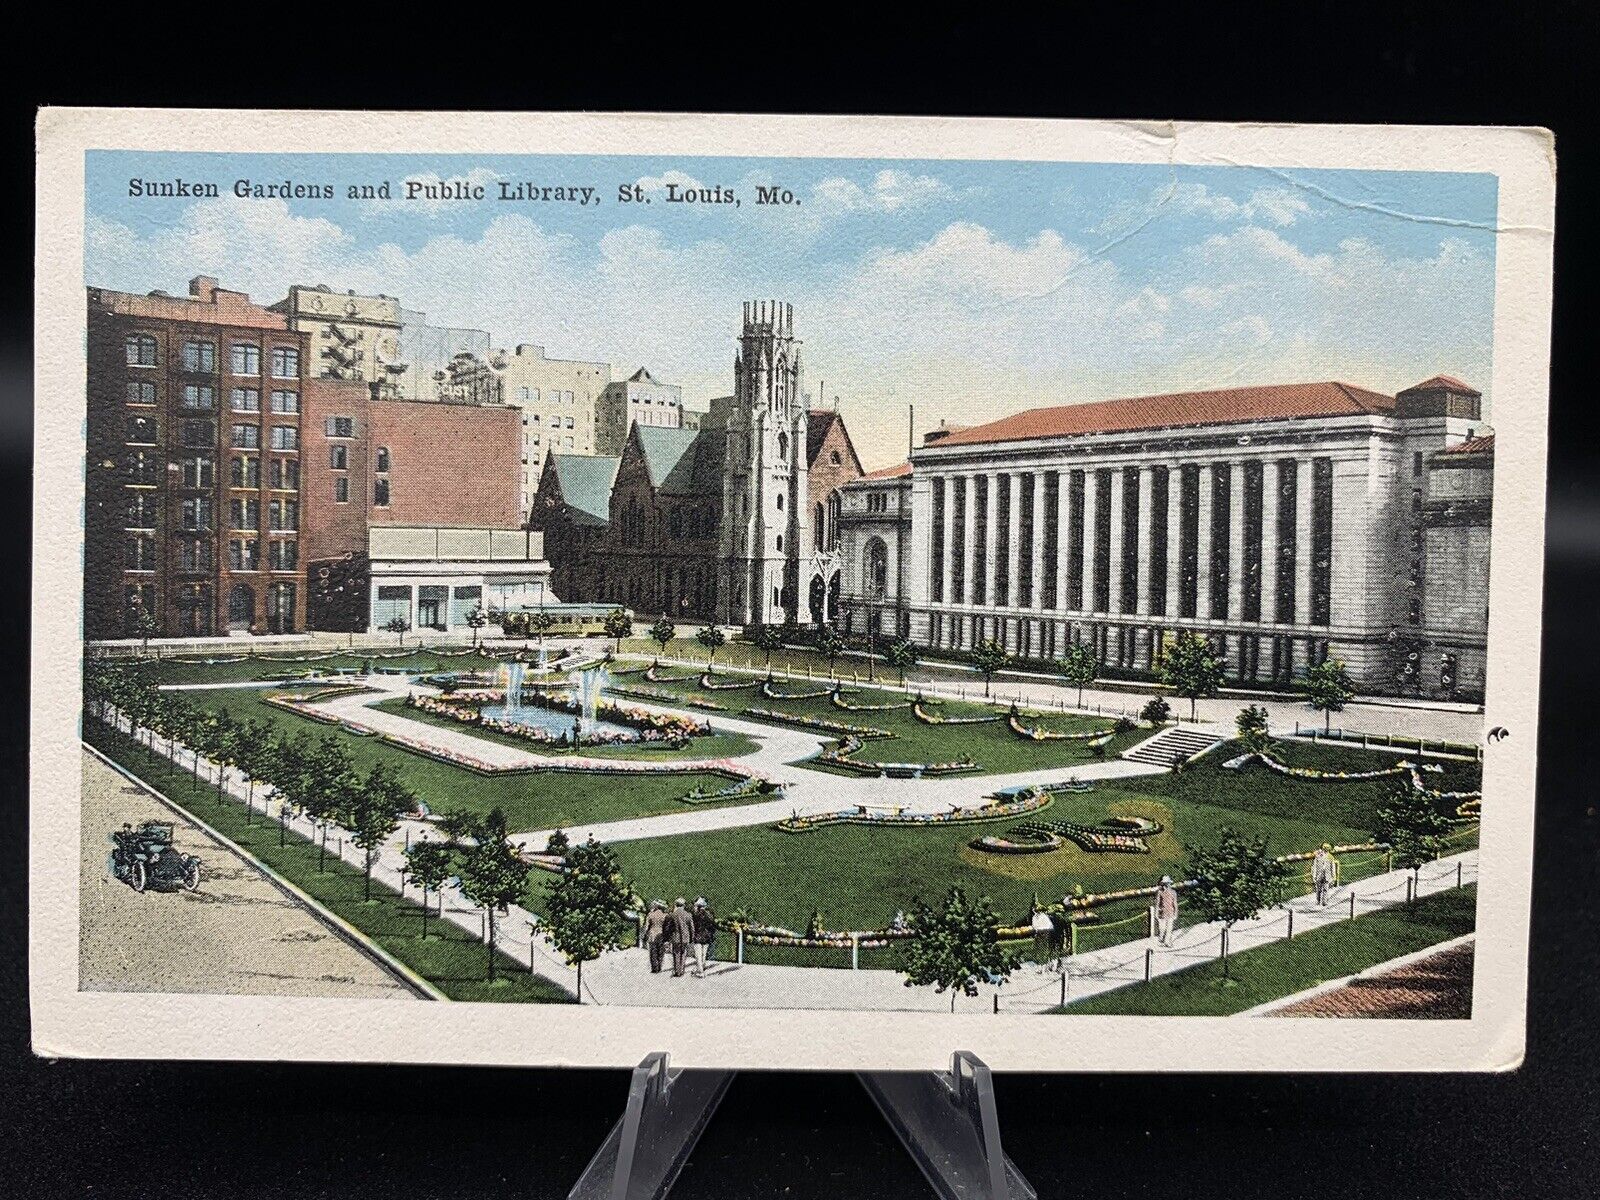 Sunken Gardens and Public Library, St. Louis, Mo. - ANTIQUE POSTCARD, unused